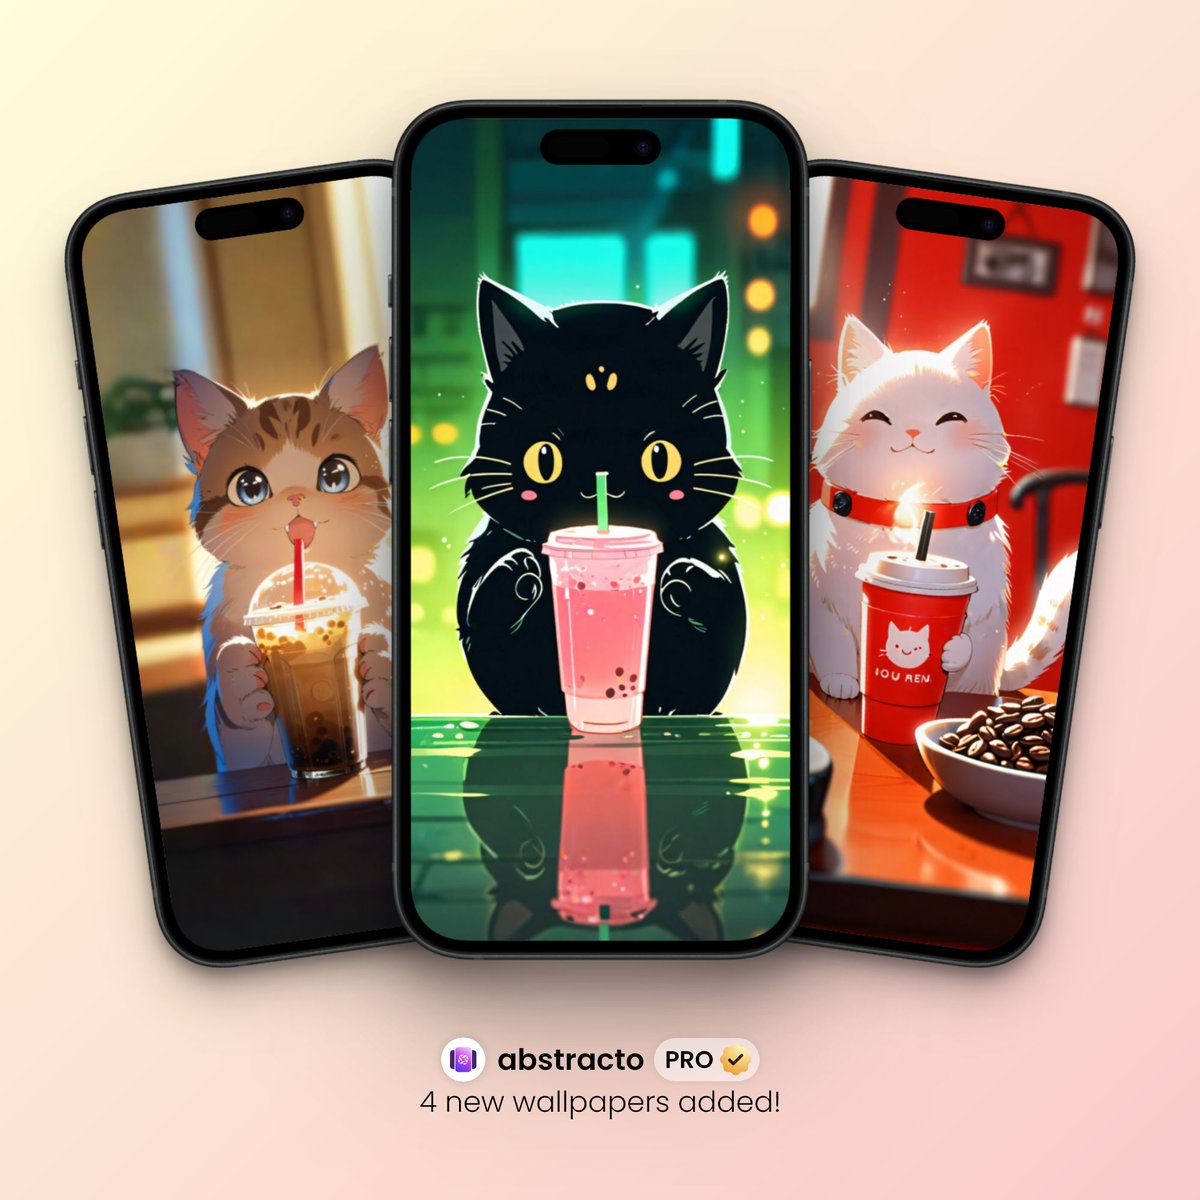 New Abstracto PRO Wallpapers! 🌟🚀

❤️ 3 New Wallpapers Added
🌟 Total 1500+ Abstract Style Wallpapers

✅ Download Abstracto
→   bit.ly/abstractowalls 

#android #trending #wallpapers #pixel9 #pixel8a #cats #pets